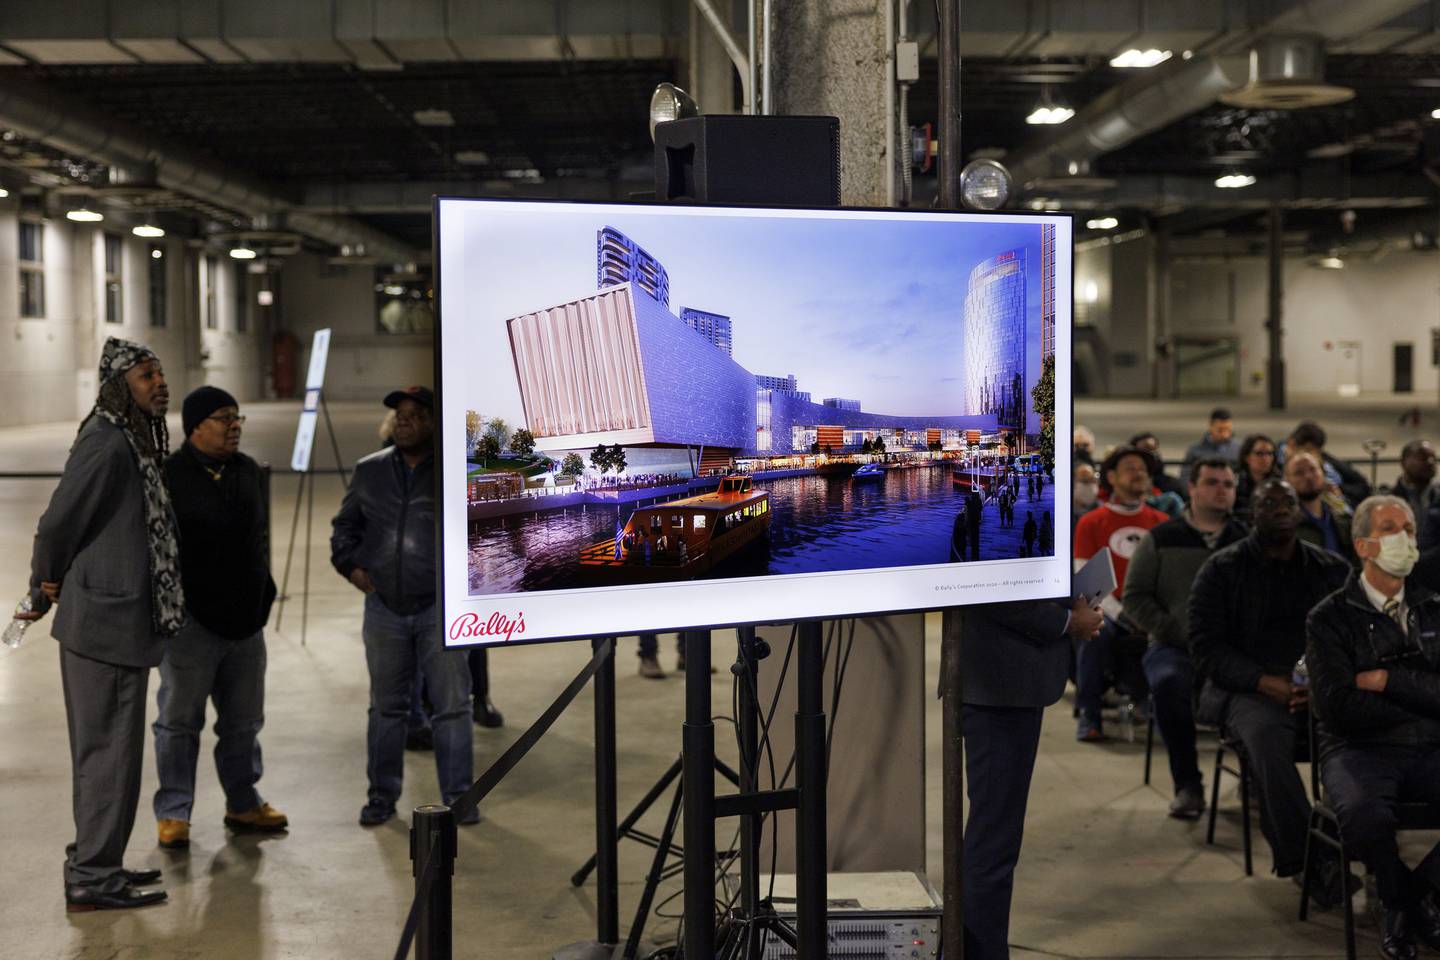 A rendering of the Bally's Casino on display as members of the public listen to a panel during a Chicago casino town hall at the Freedom Center Monday night.